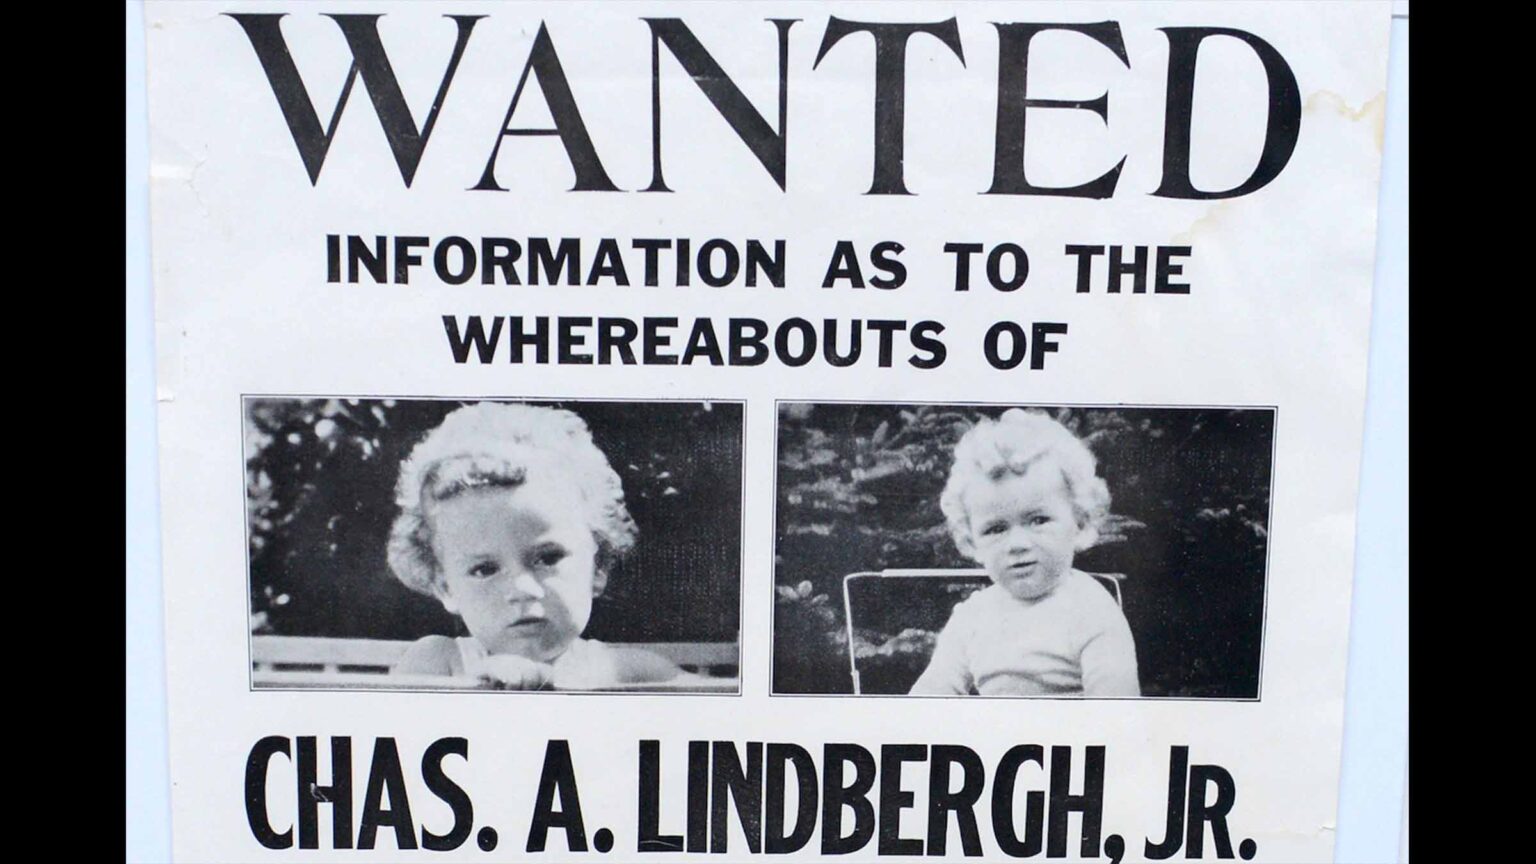 Nearly 85 years ago, Bruno Richard Hauptmann was killed for kidnapping and murdering the Lindbergh Baby. But did he die an innocent man?